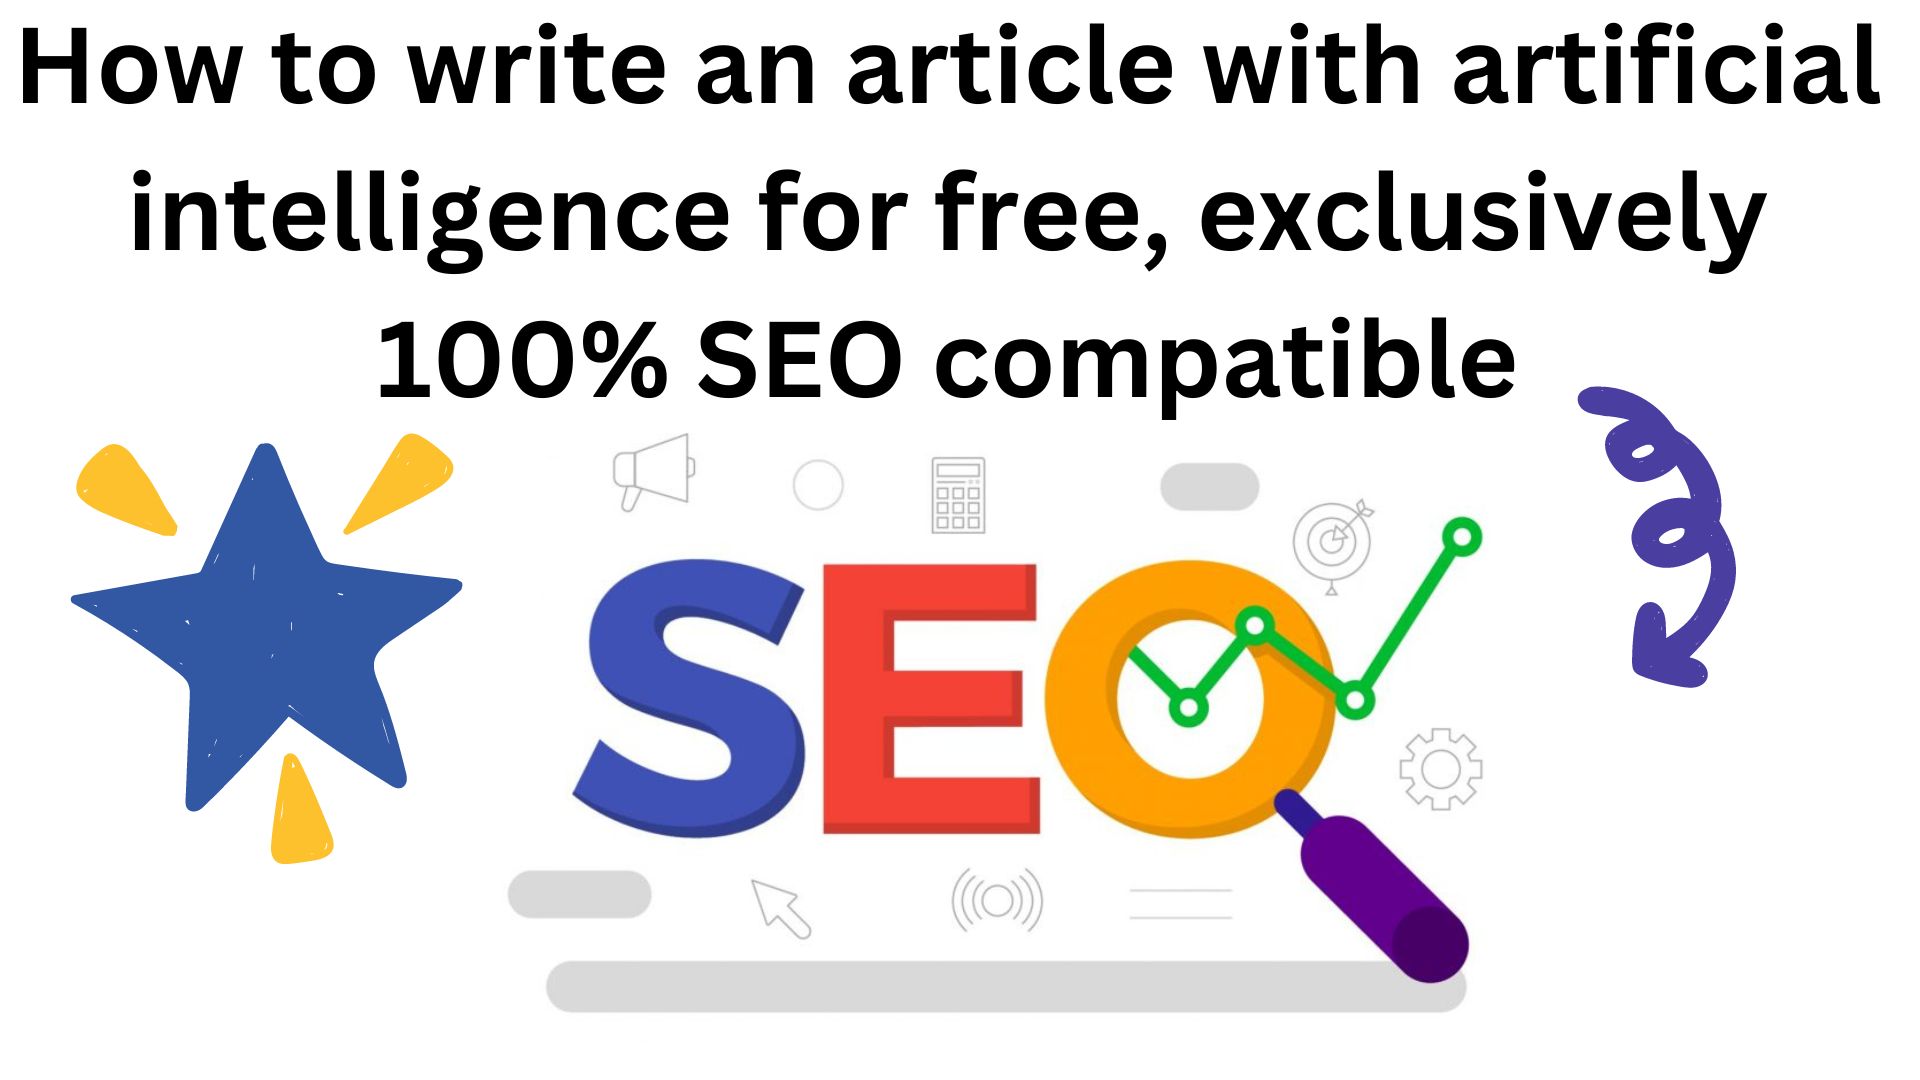 How To Write An Article With Artificial Intelligence For Free, Exclusively 100% Seo Compatible